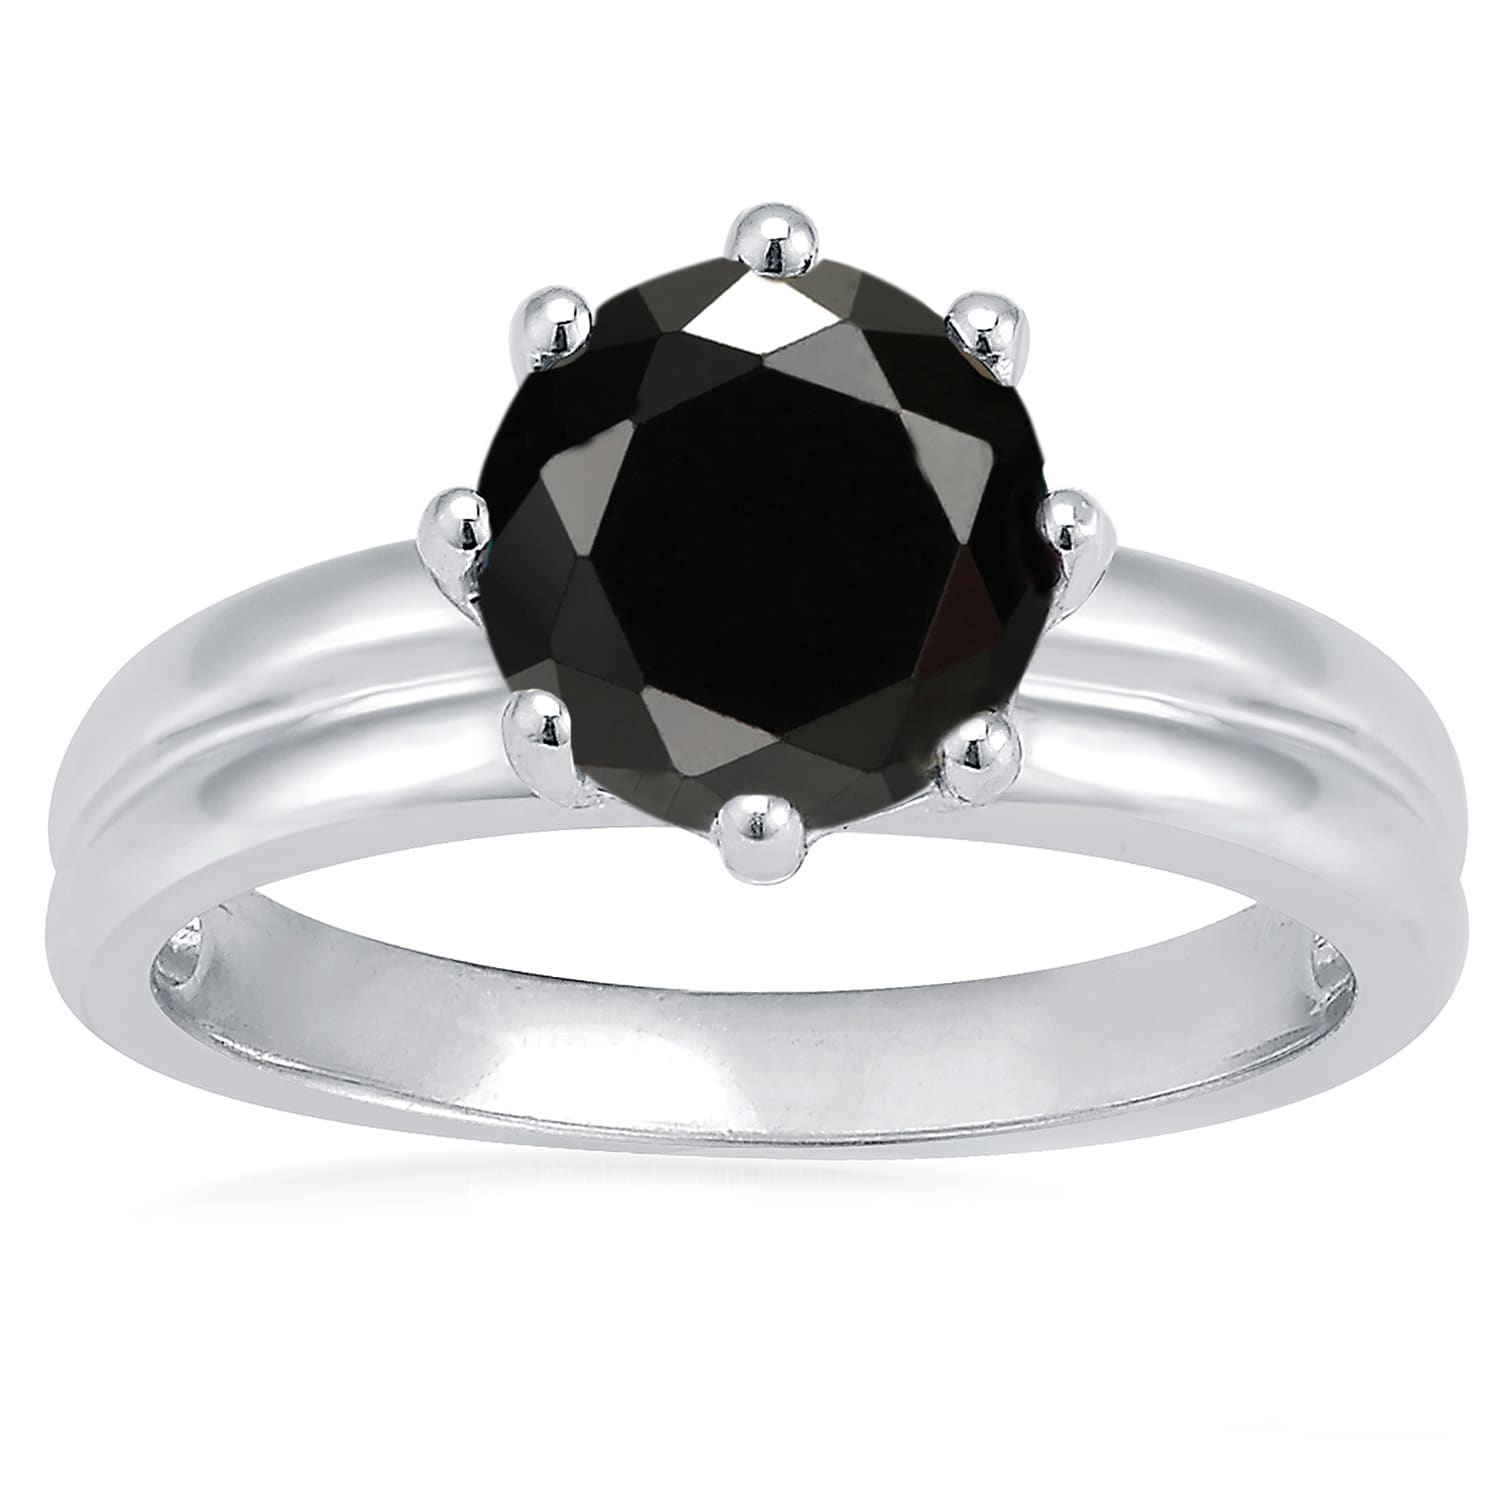 Stunning Boi Ploi Black Spinel solitaire ring in 14k gold over Sterling silver